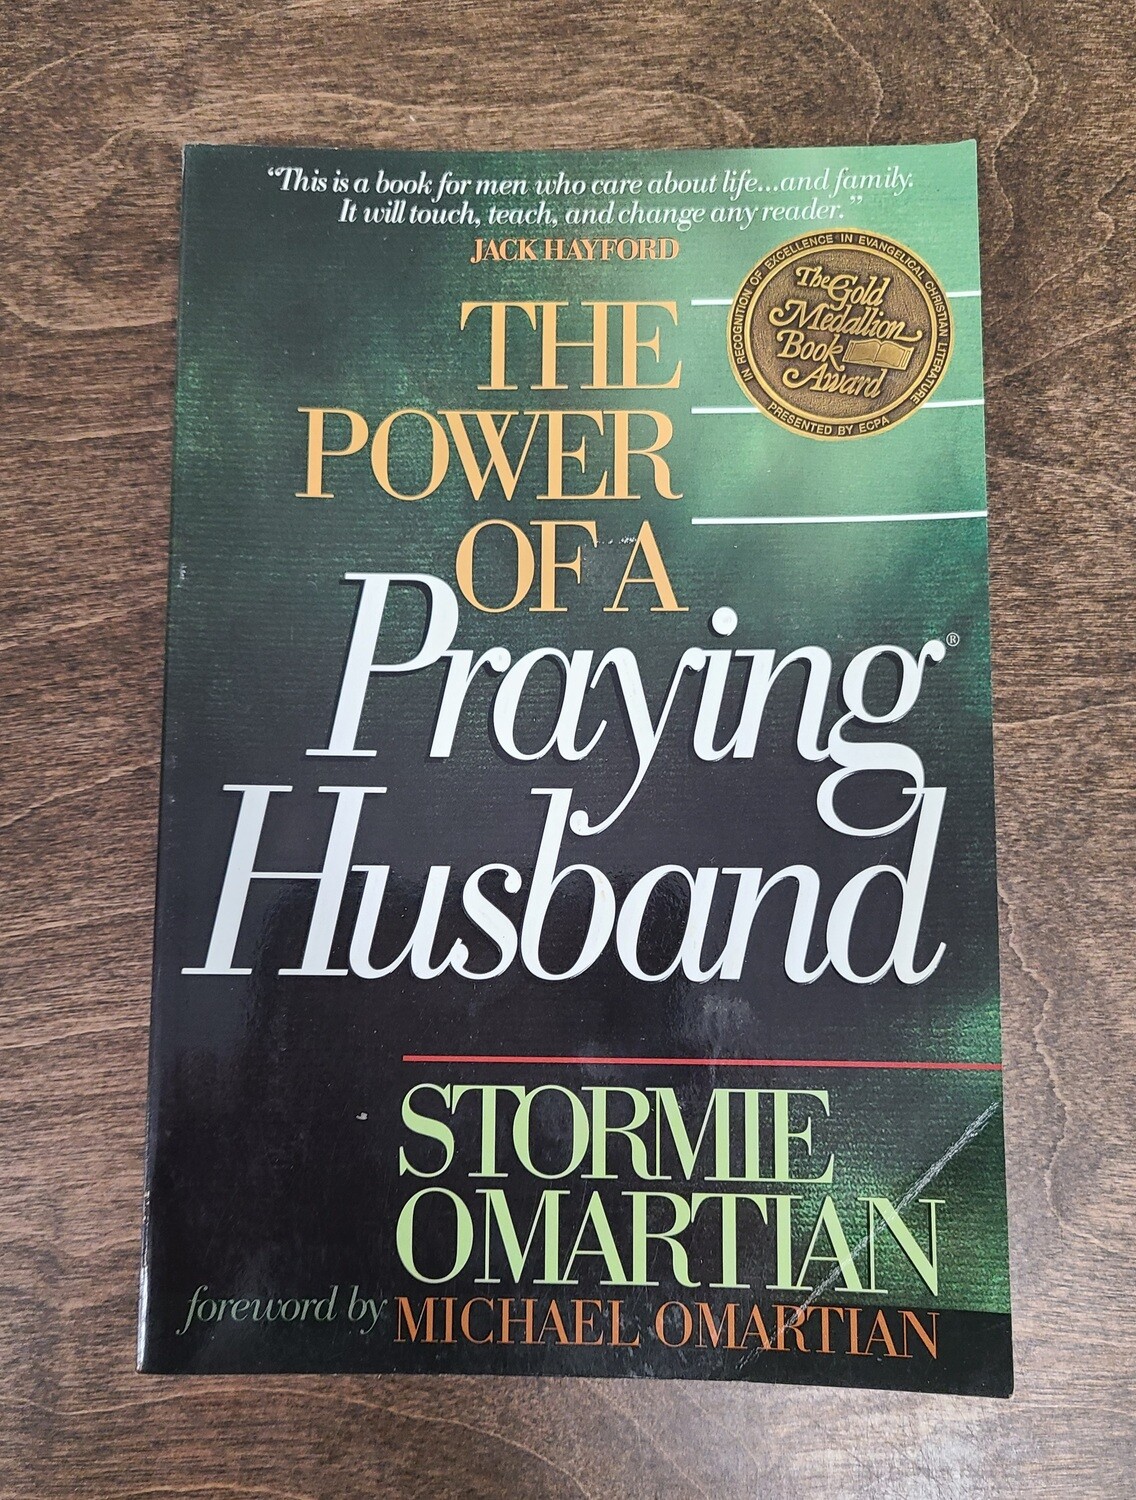 The Power of a Praying Husband by Stormie OMartian